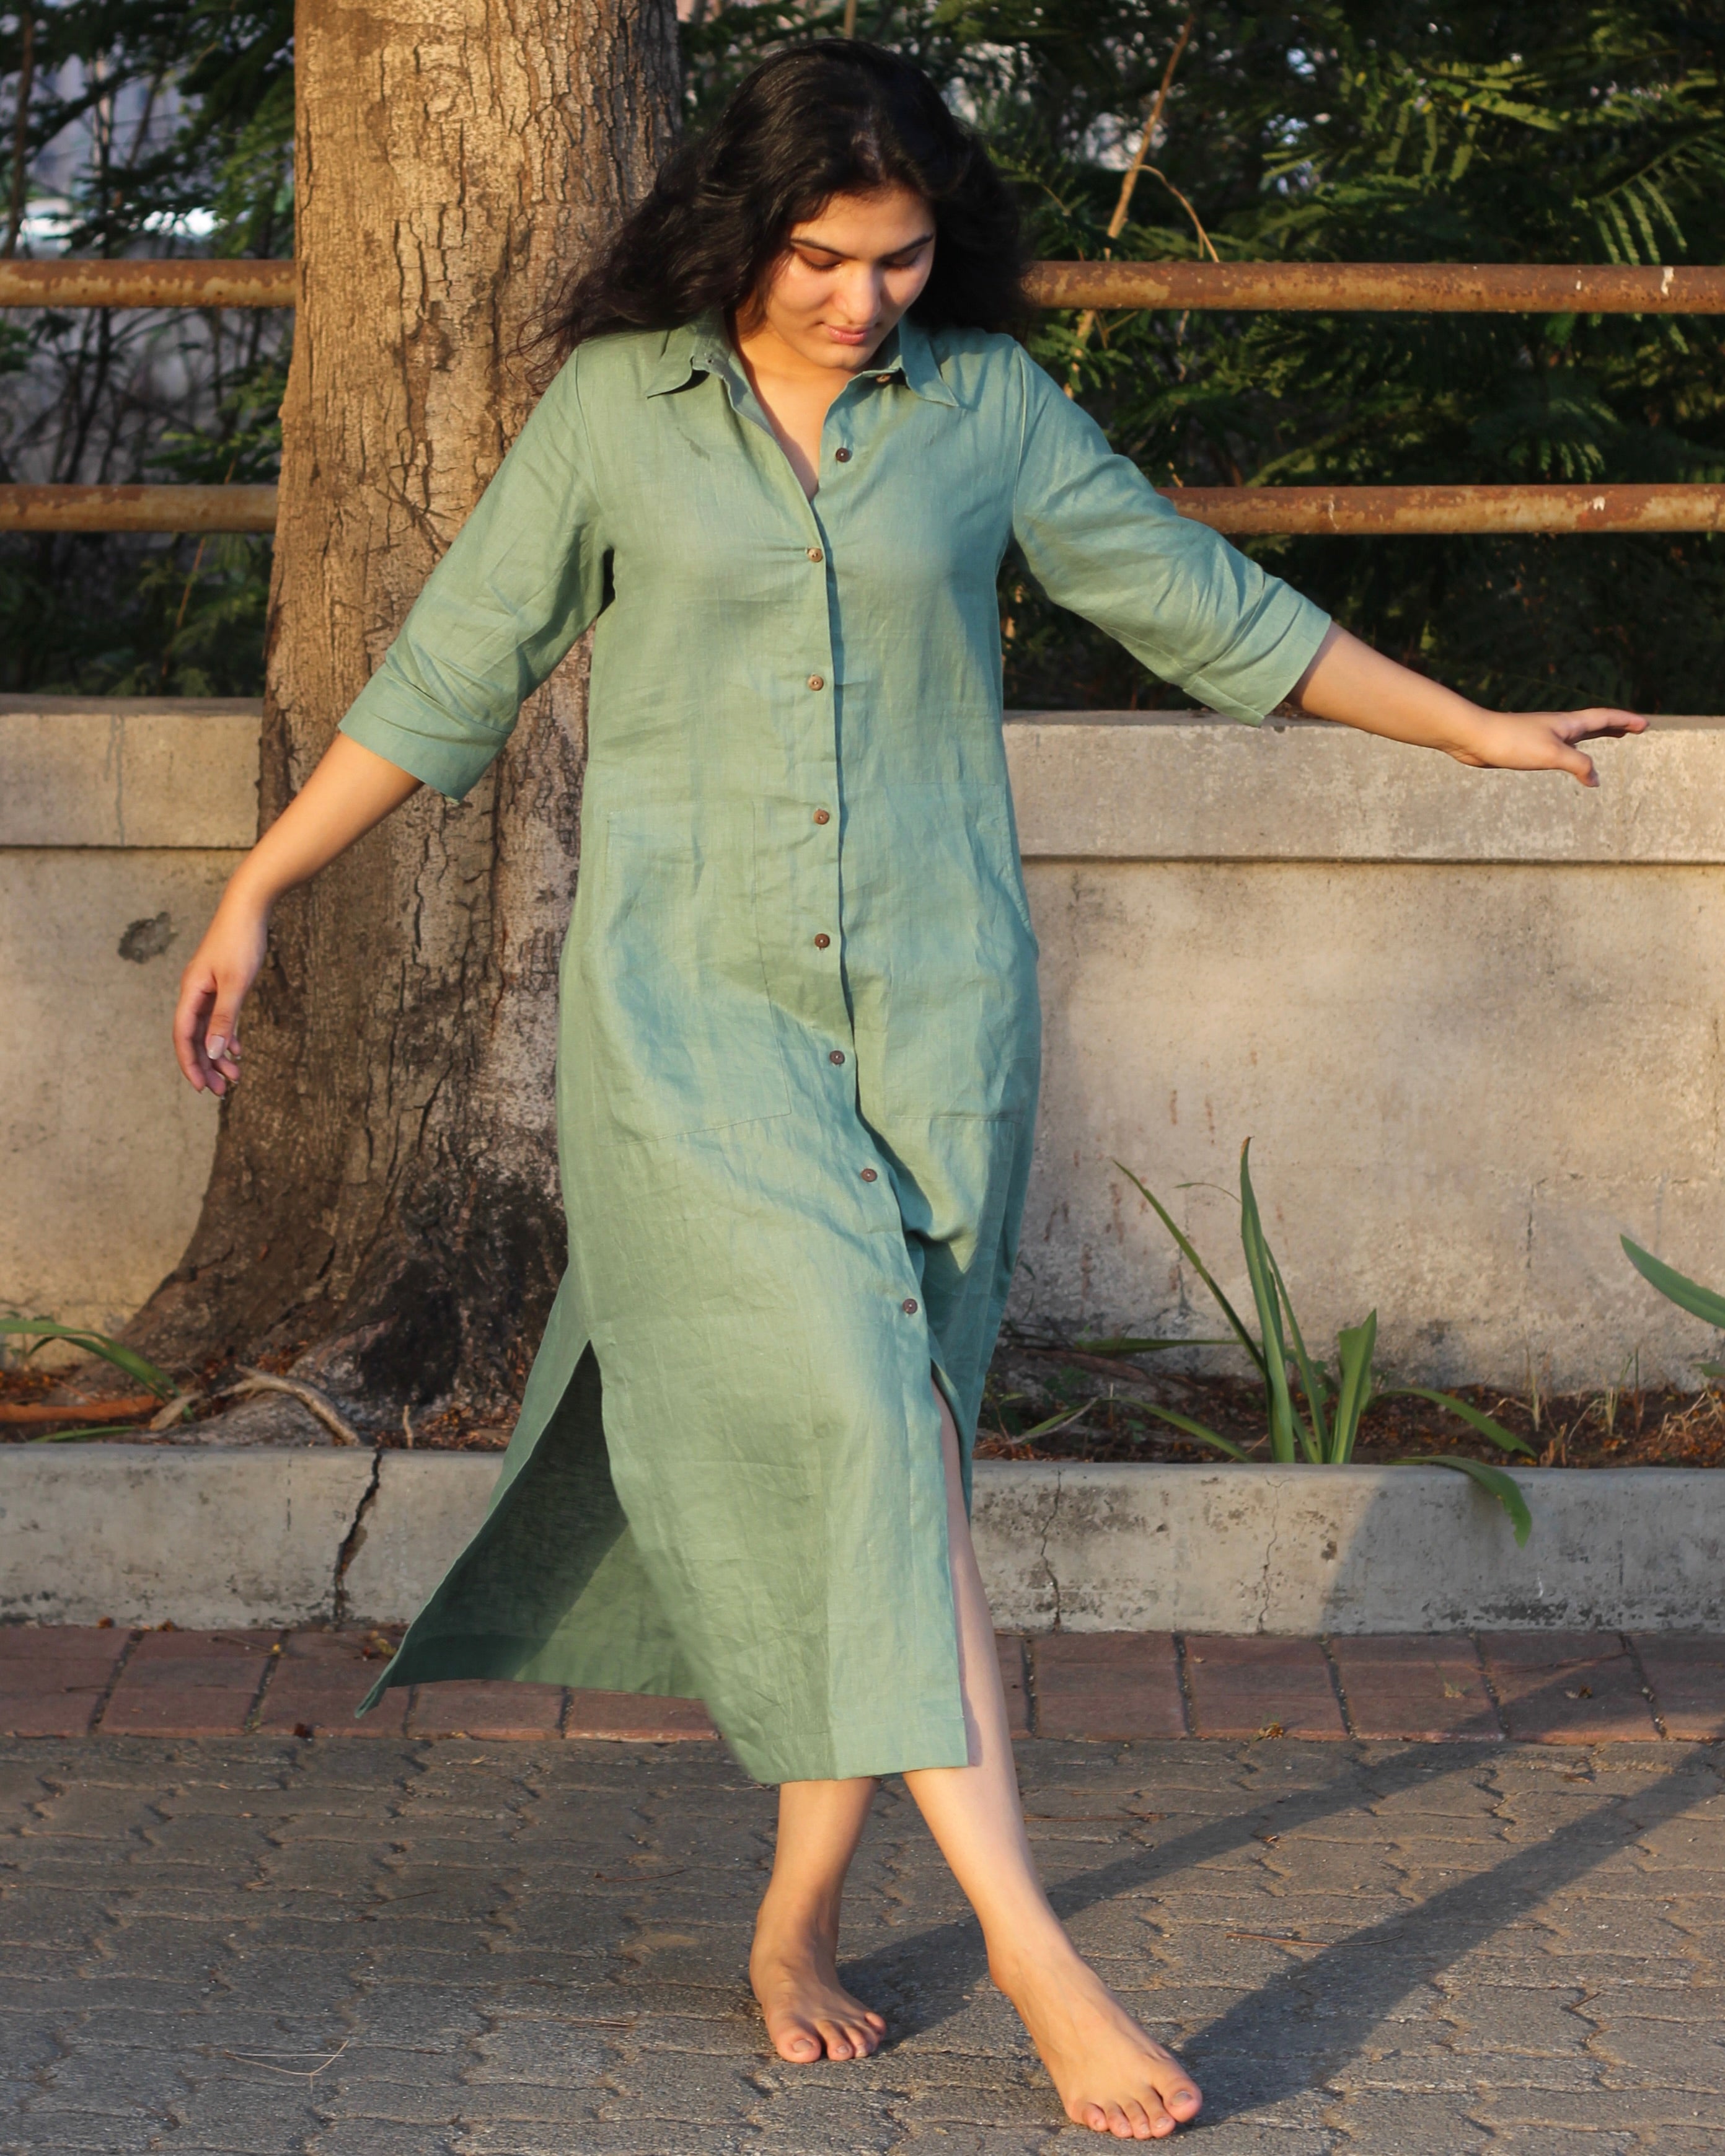 Sea Green Premium Linen Long Shirt Dress with Shirt Collar, 3/4 Sleeves, Unique Front Pockets, and Side Cut